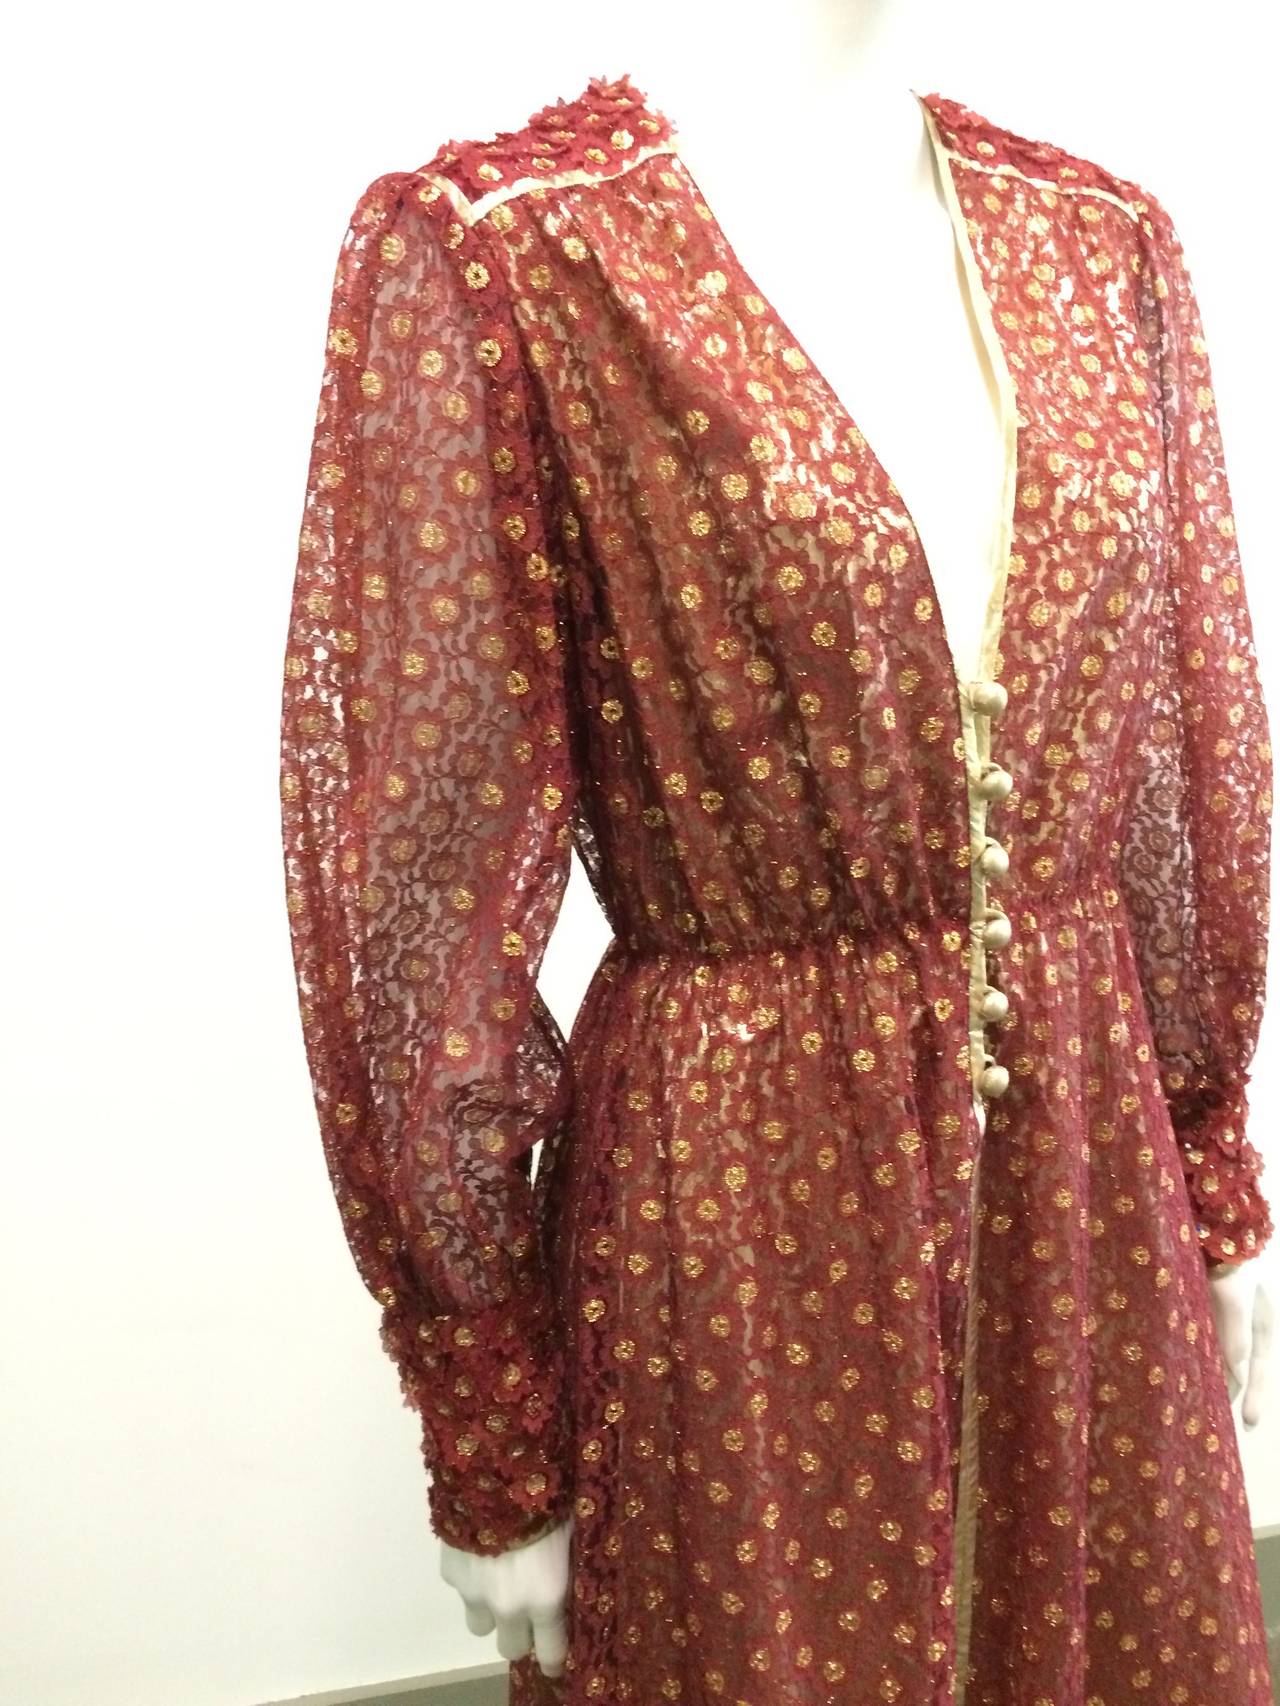 Brown Norman Hartnell 1960s Lace Evening Gown Size 6.